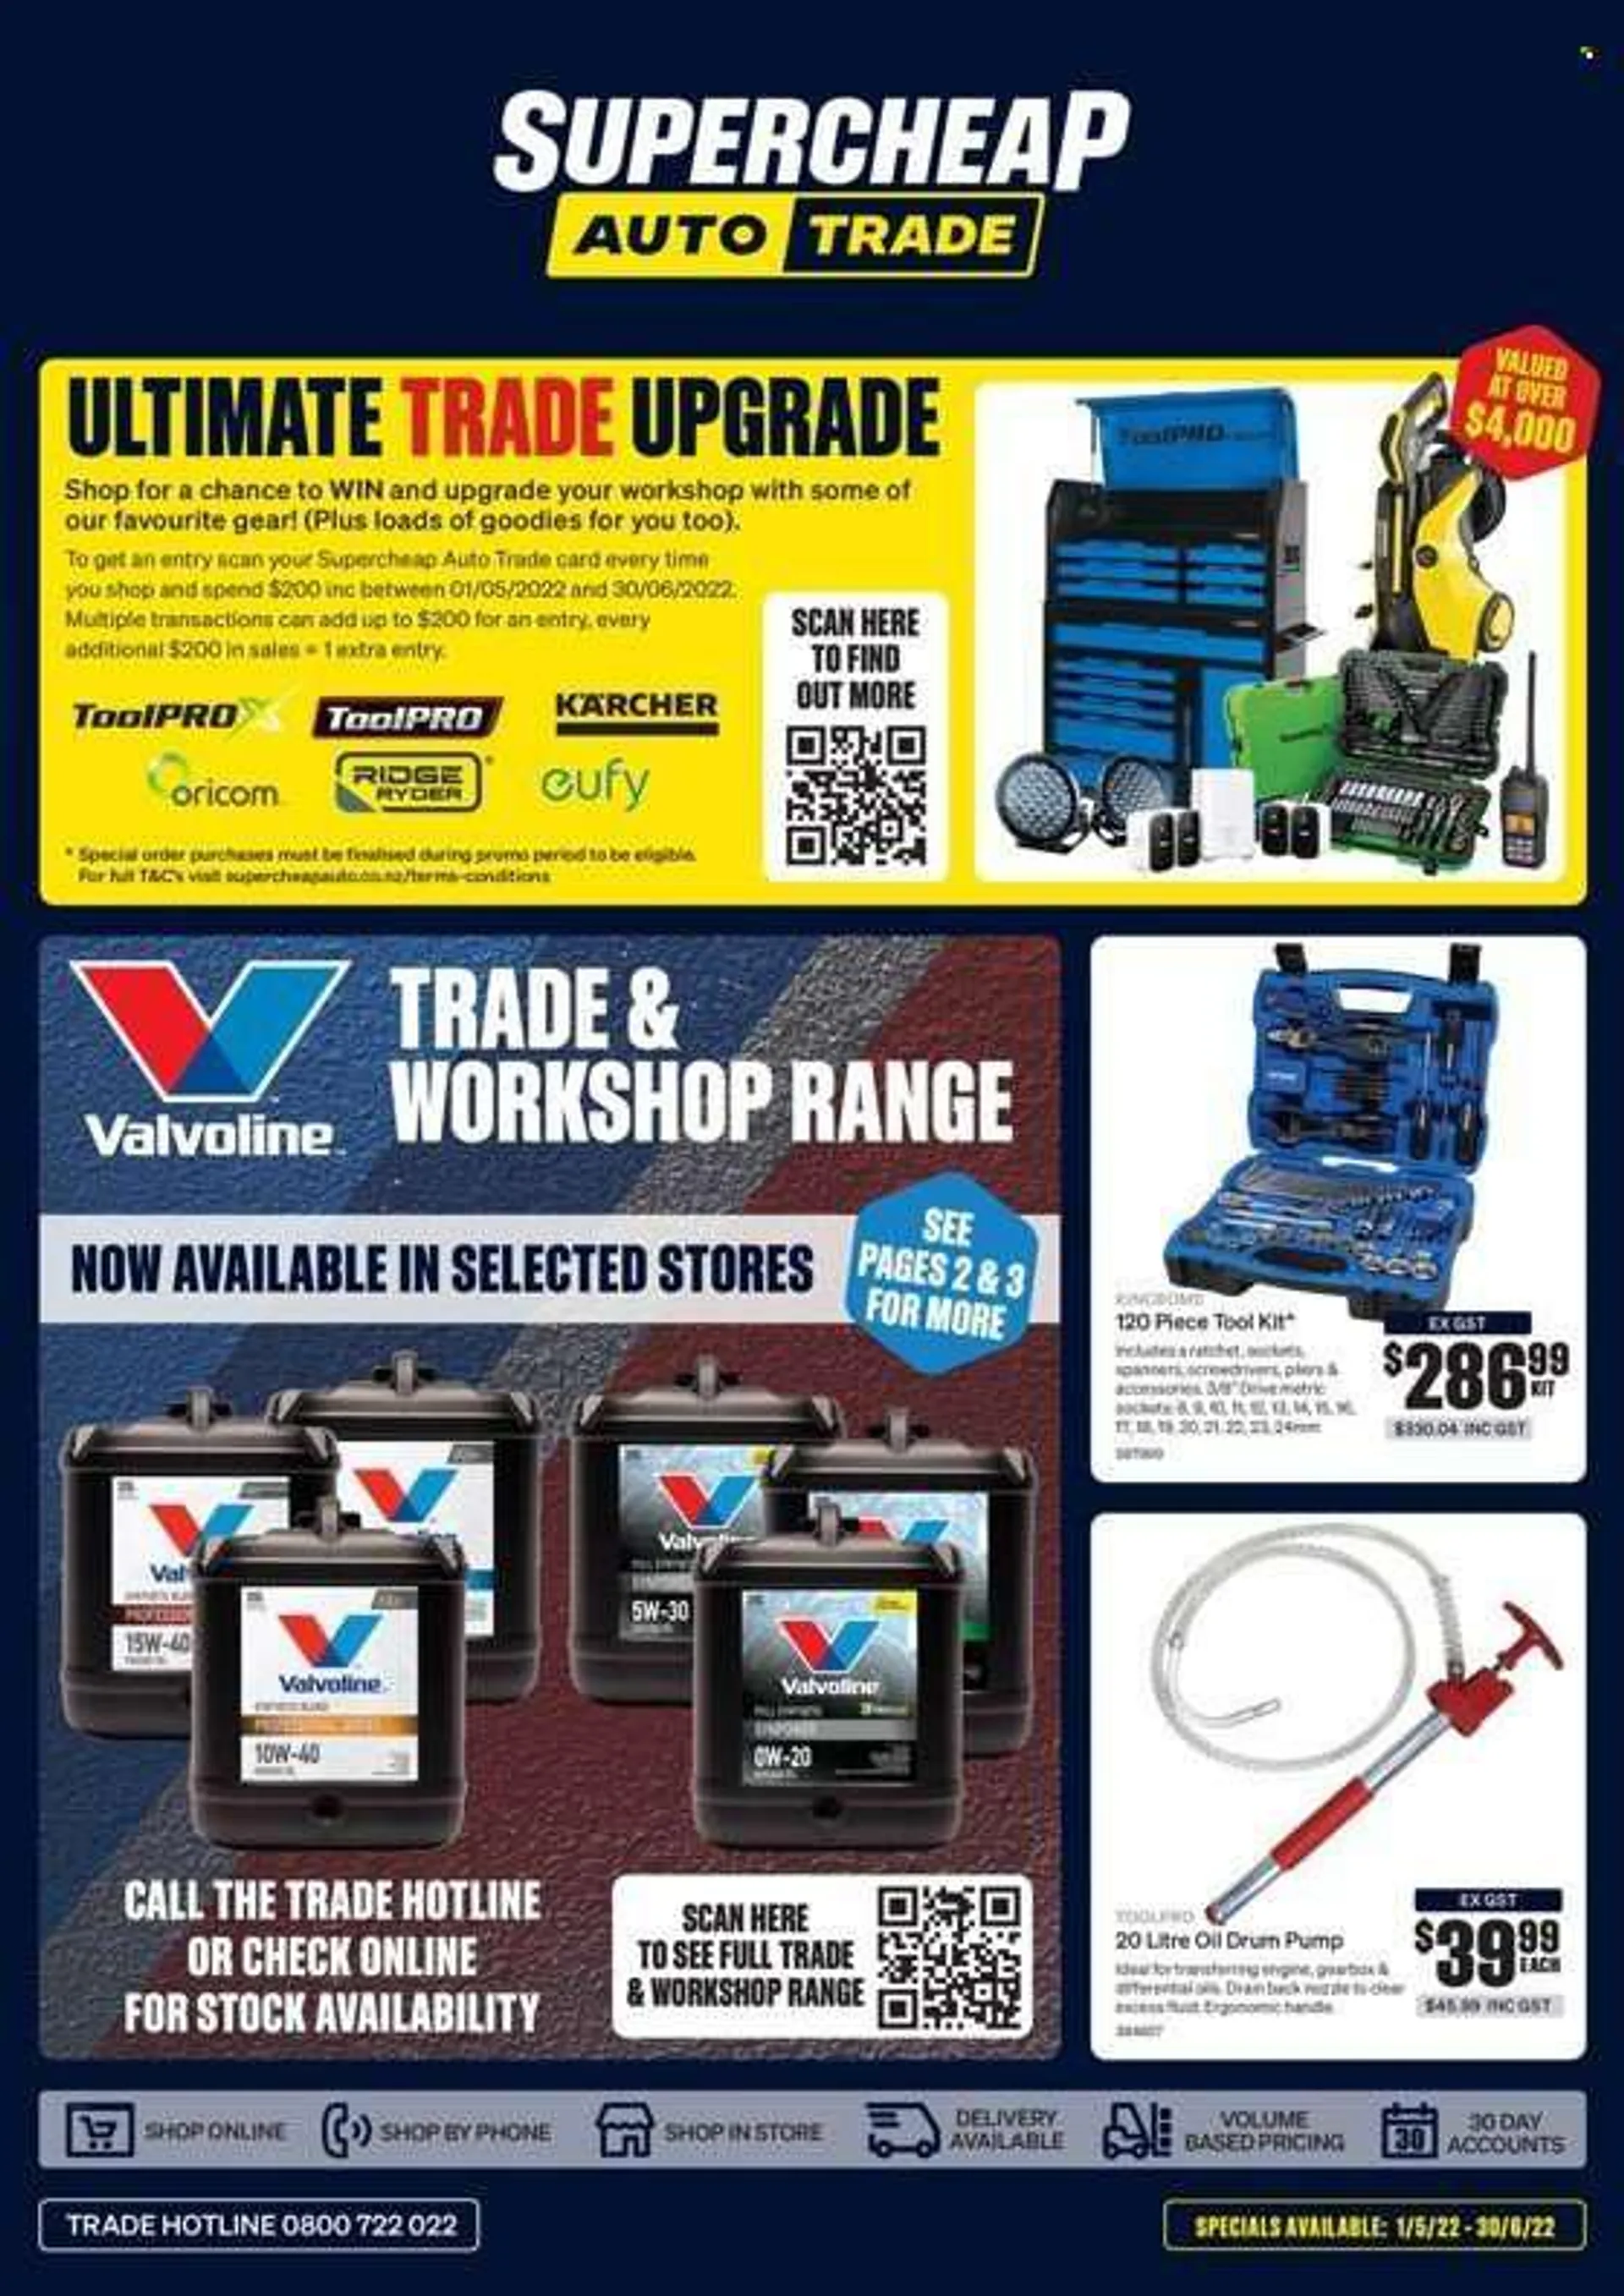 SuperCheap Auto mailer - 01.05.2022 - 30.06.2022. - 1 May 30 June 2022 - Page 1